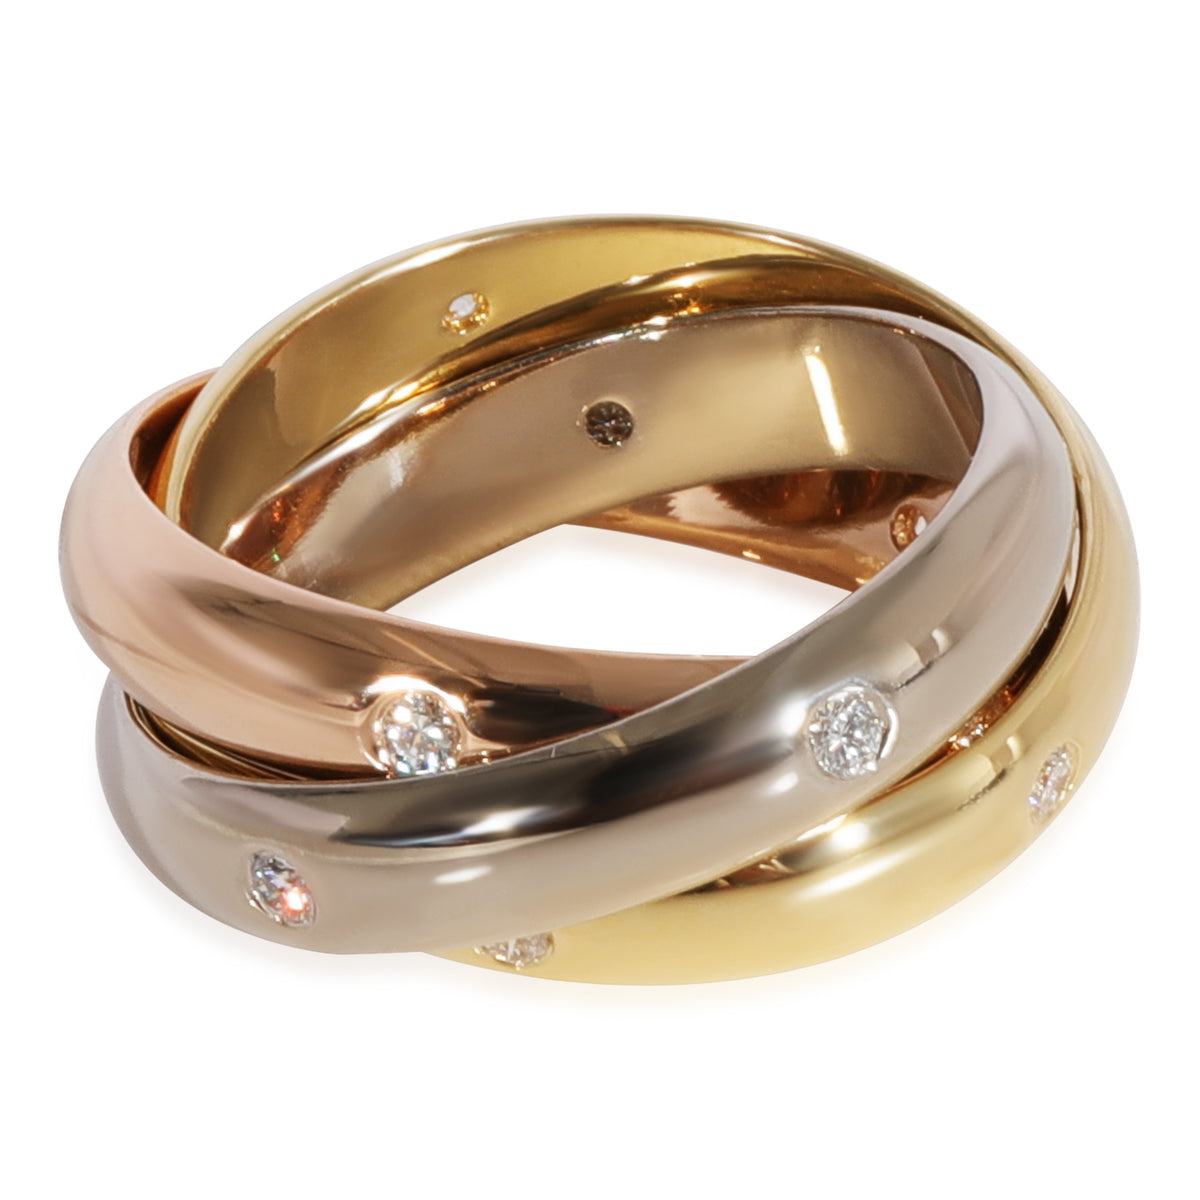 Cartier Trinity Ring with Diamonds in 18K 3 Tone Gold 0.19 CTW